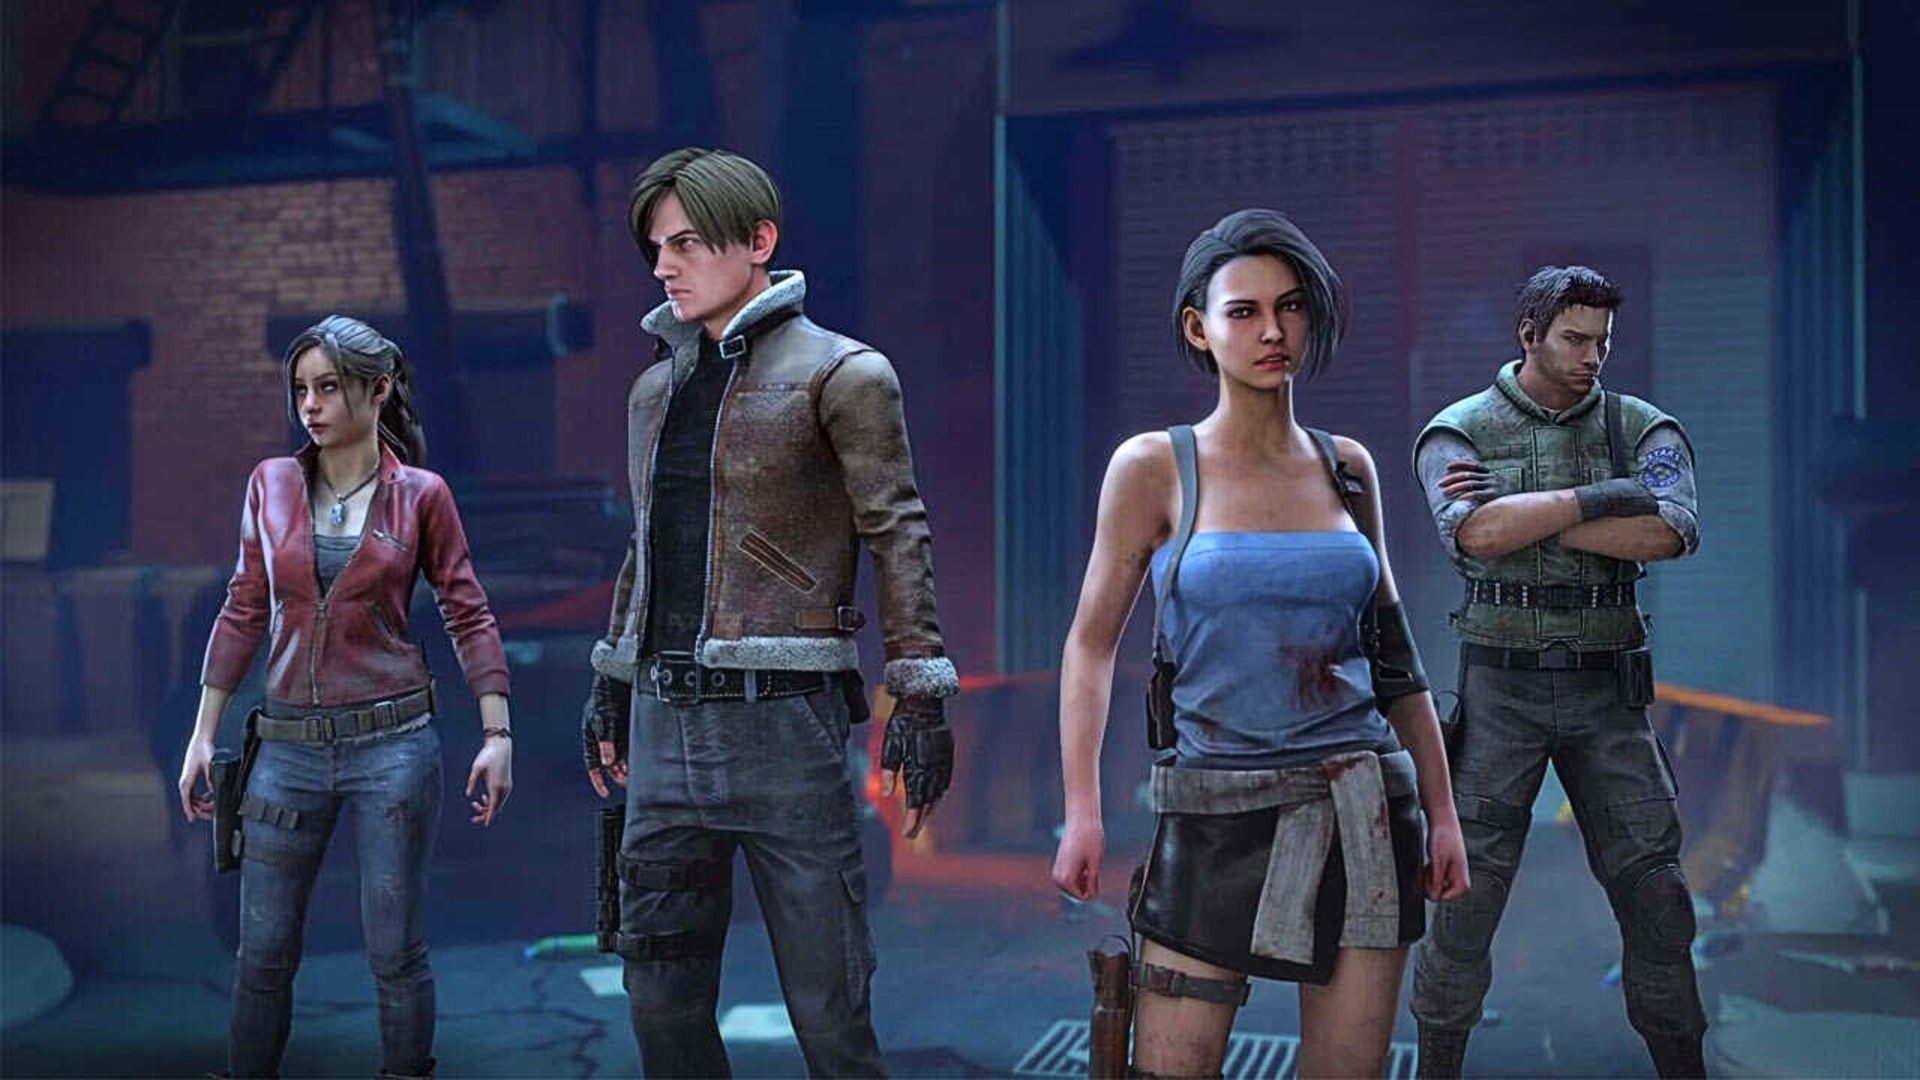 Leon, Jill, Claire, and Chris from the Resident Evil chapter of Dead By Daylight